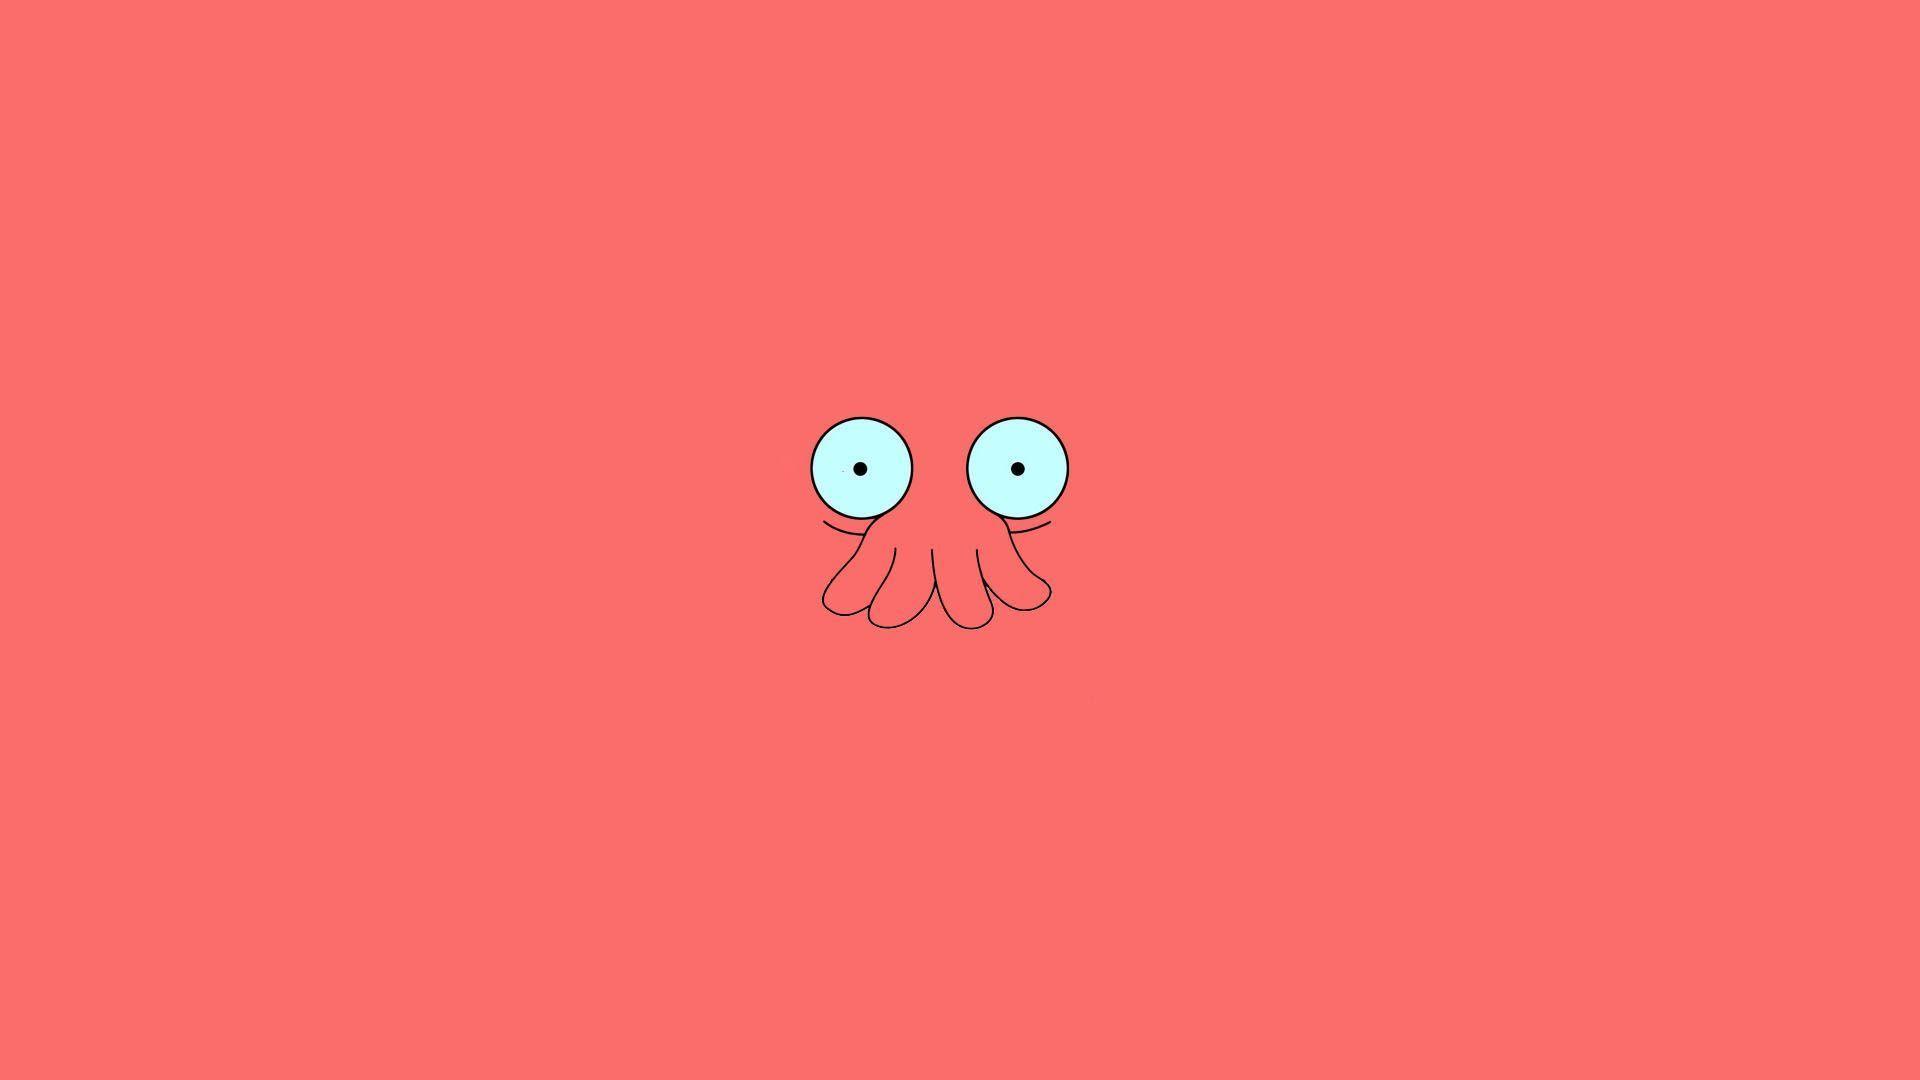 image For > Why Not Zoidberg Wallpaper